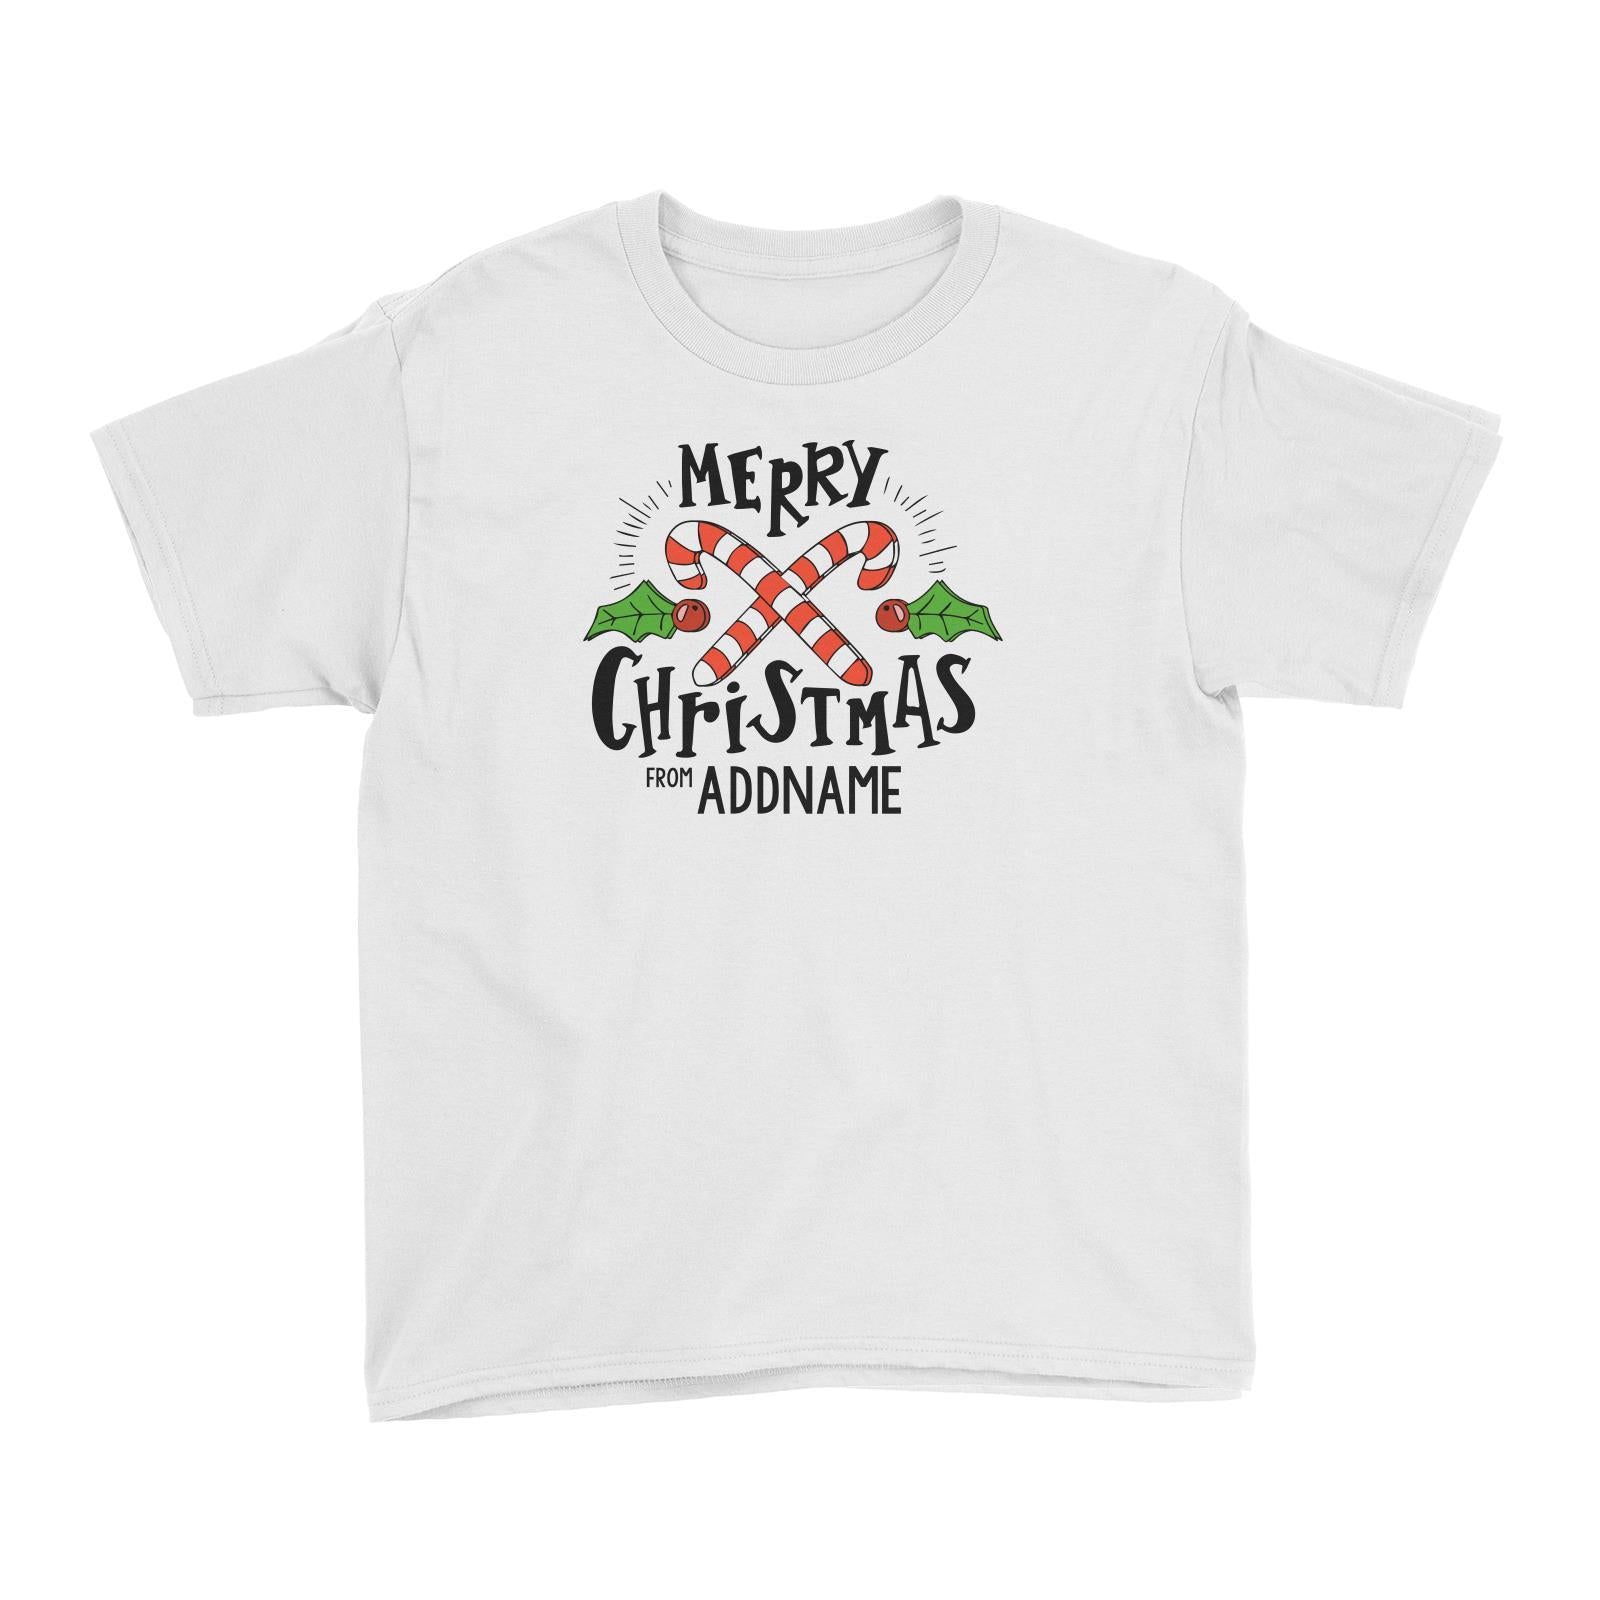 Merry Chrismas with Holly and Candy Cane Greeting Addname Kid's T-Shirt Christmas Matching Family Personalizable Designs Lettering